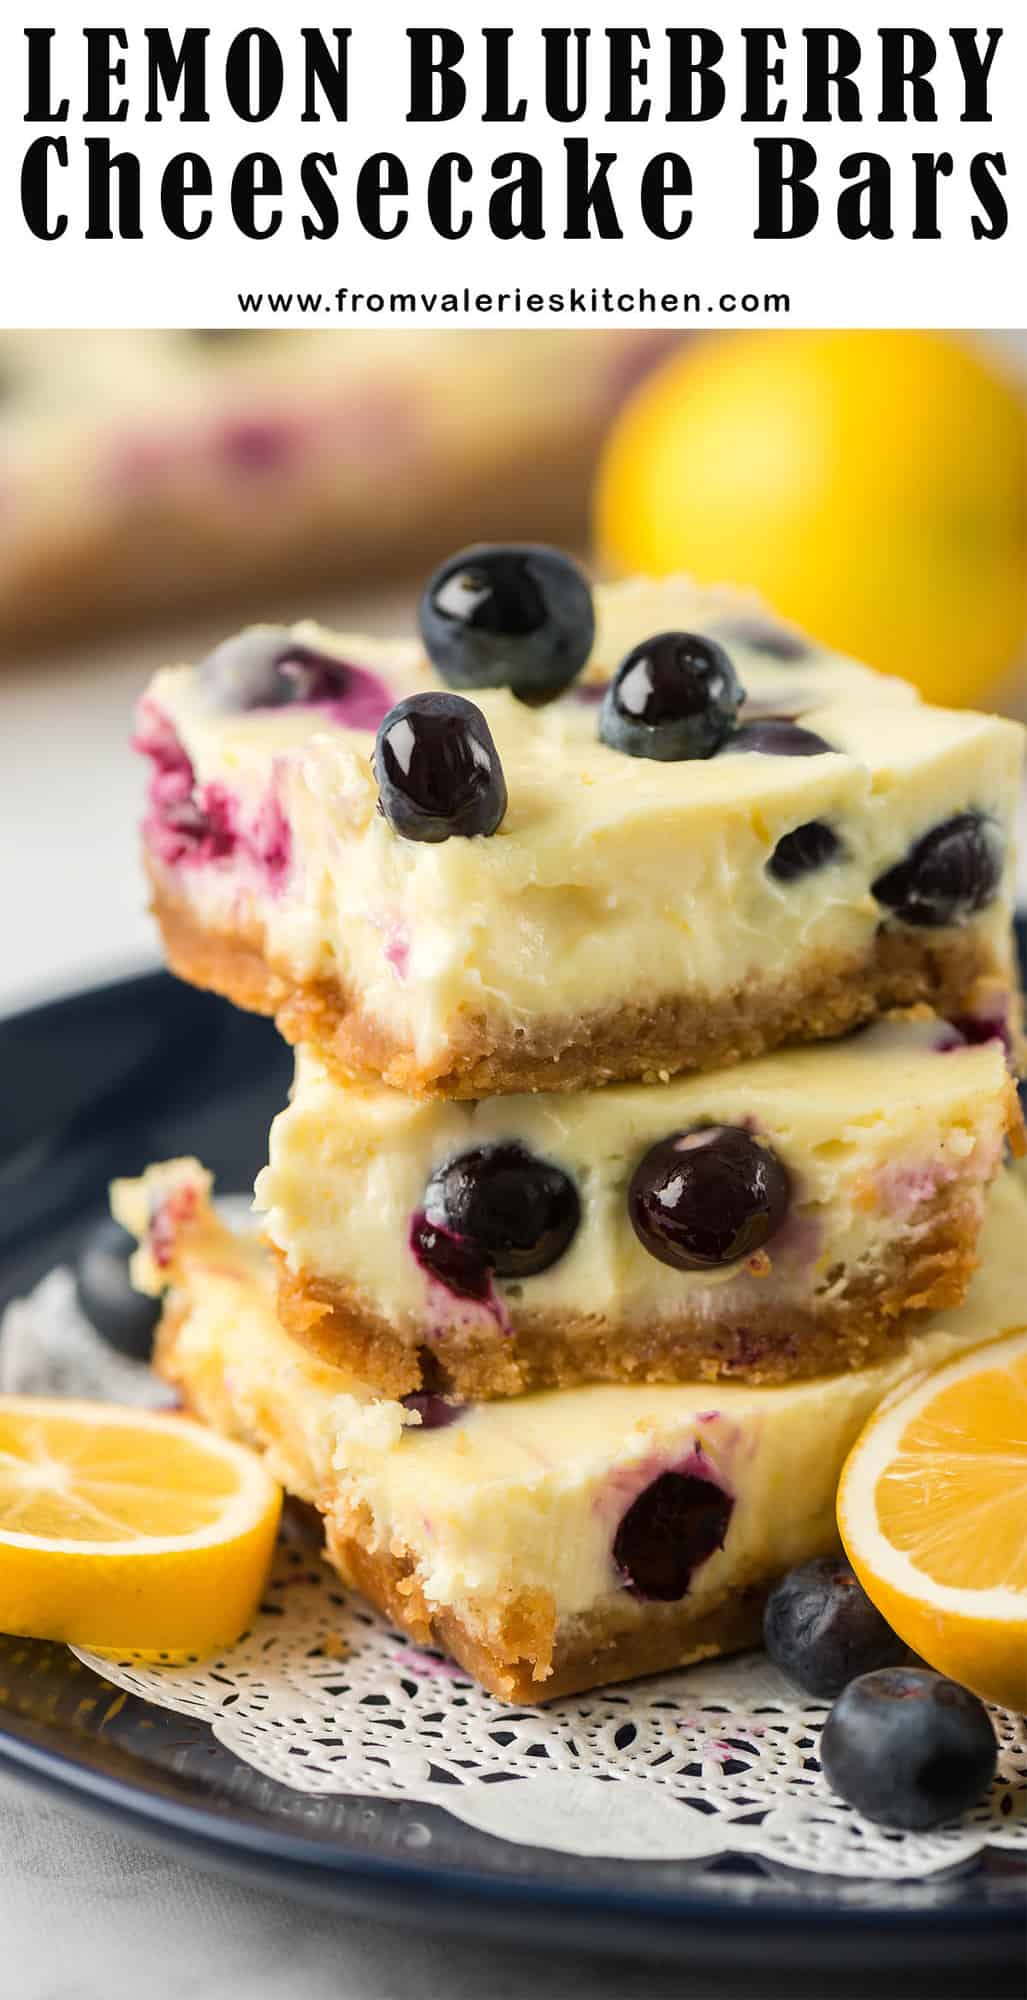 A stack of Lemon Blueberry Cheesecake Bars on a black plate with overlay text.